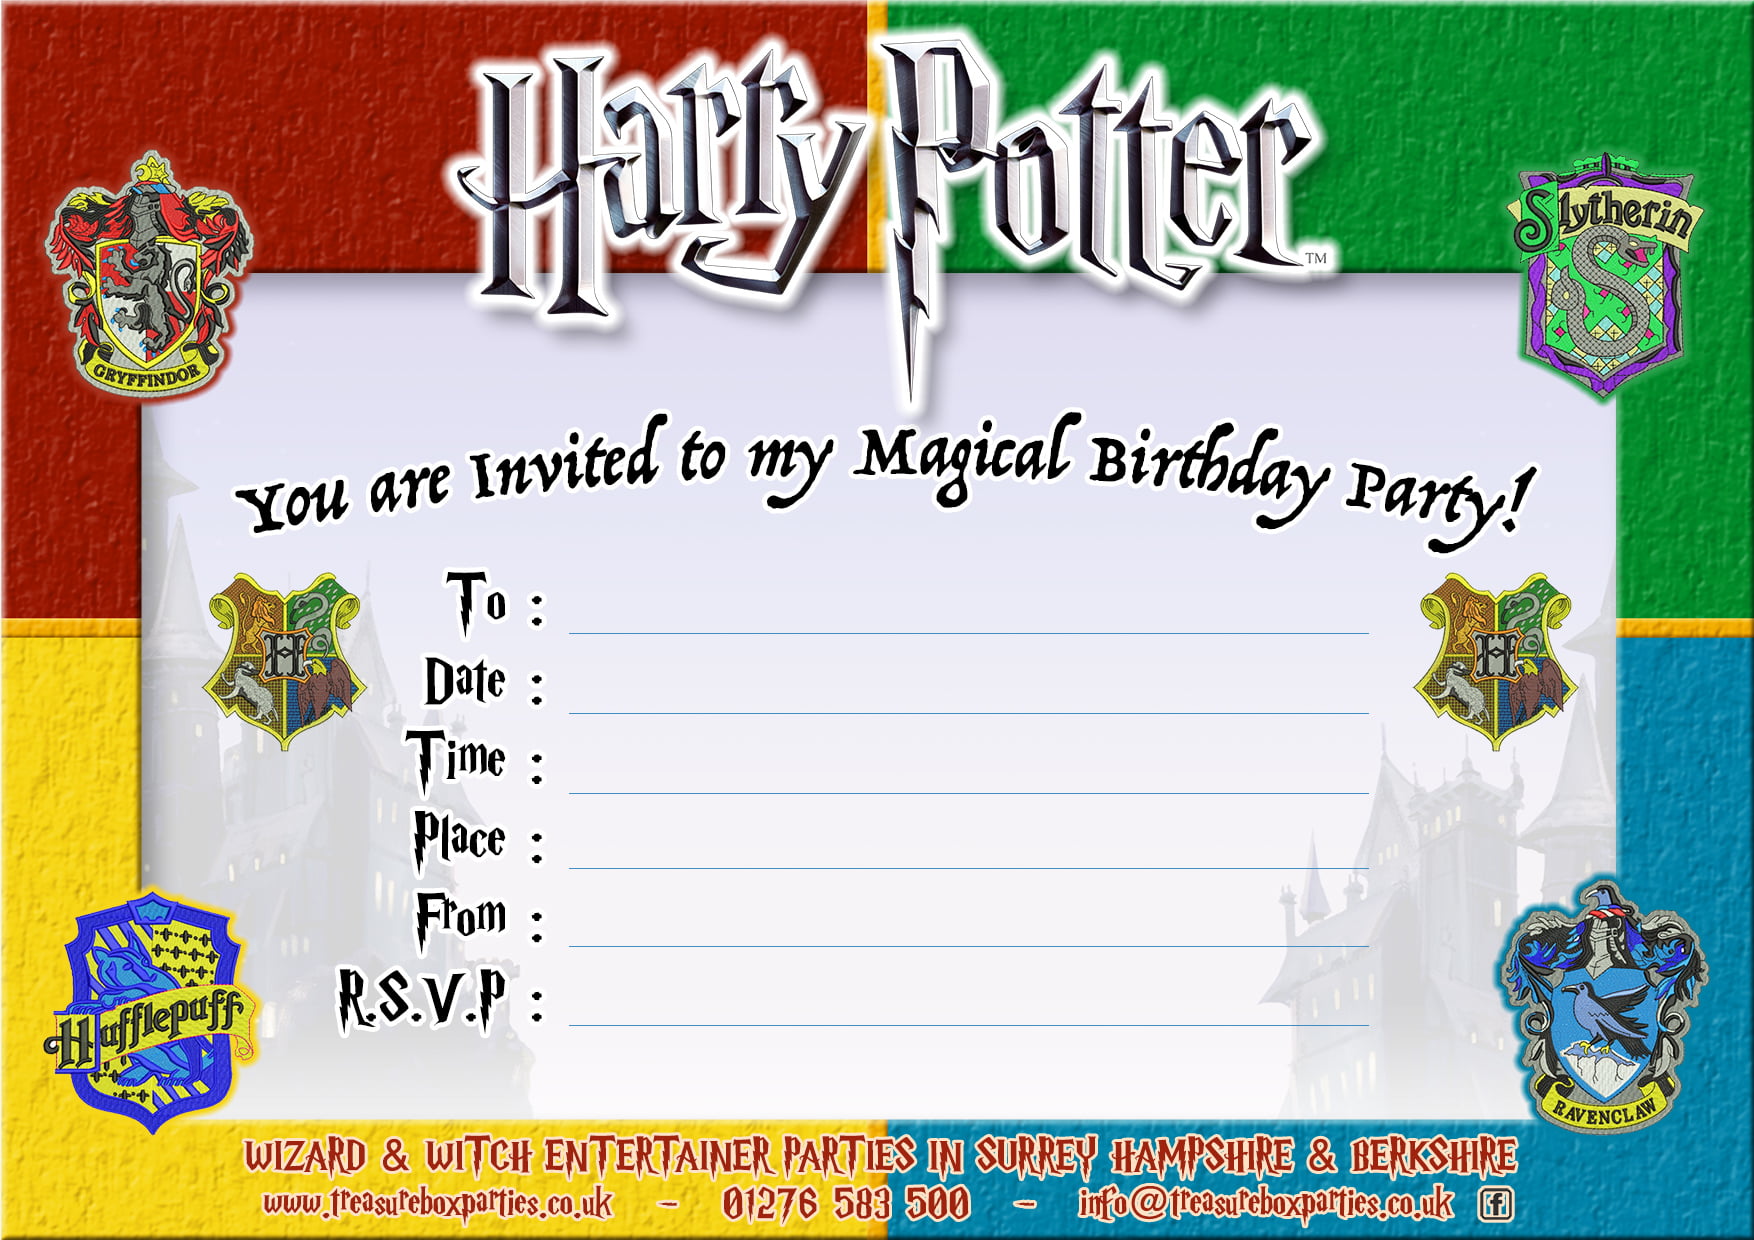 Harry Potter Birthday Party Invitations | FREE Printable Baby Shower